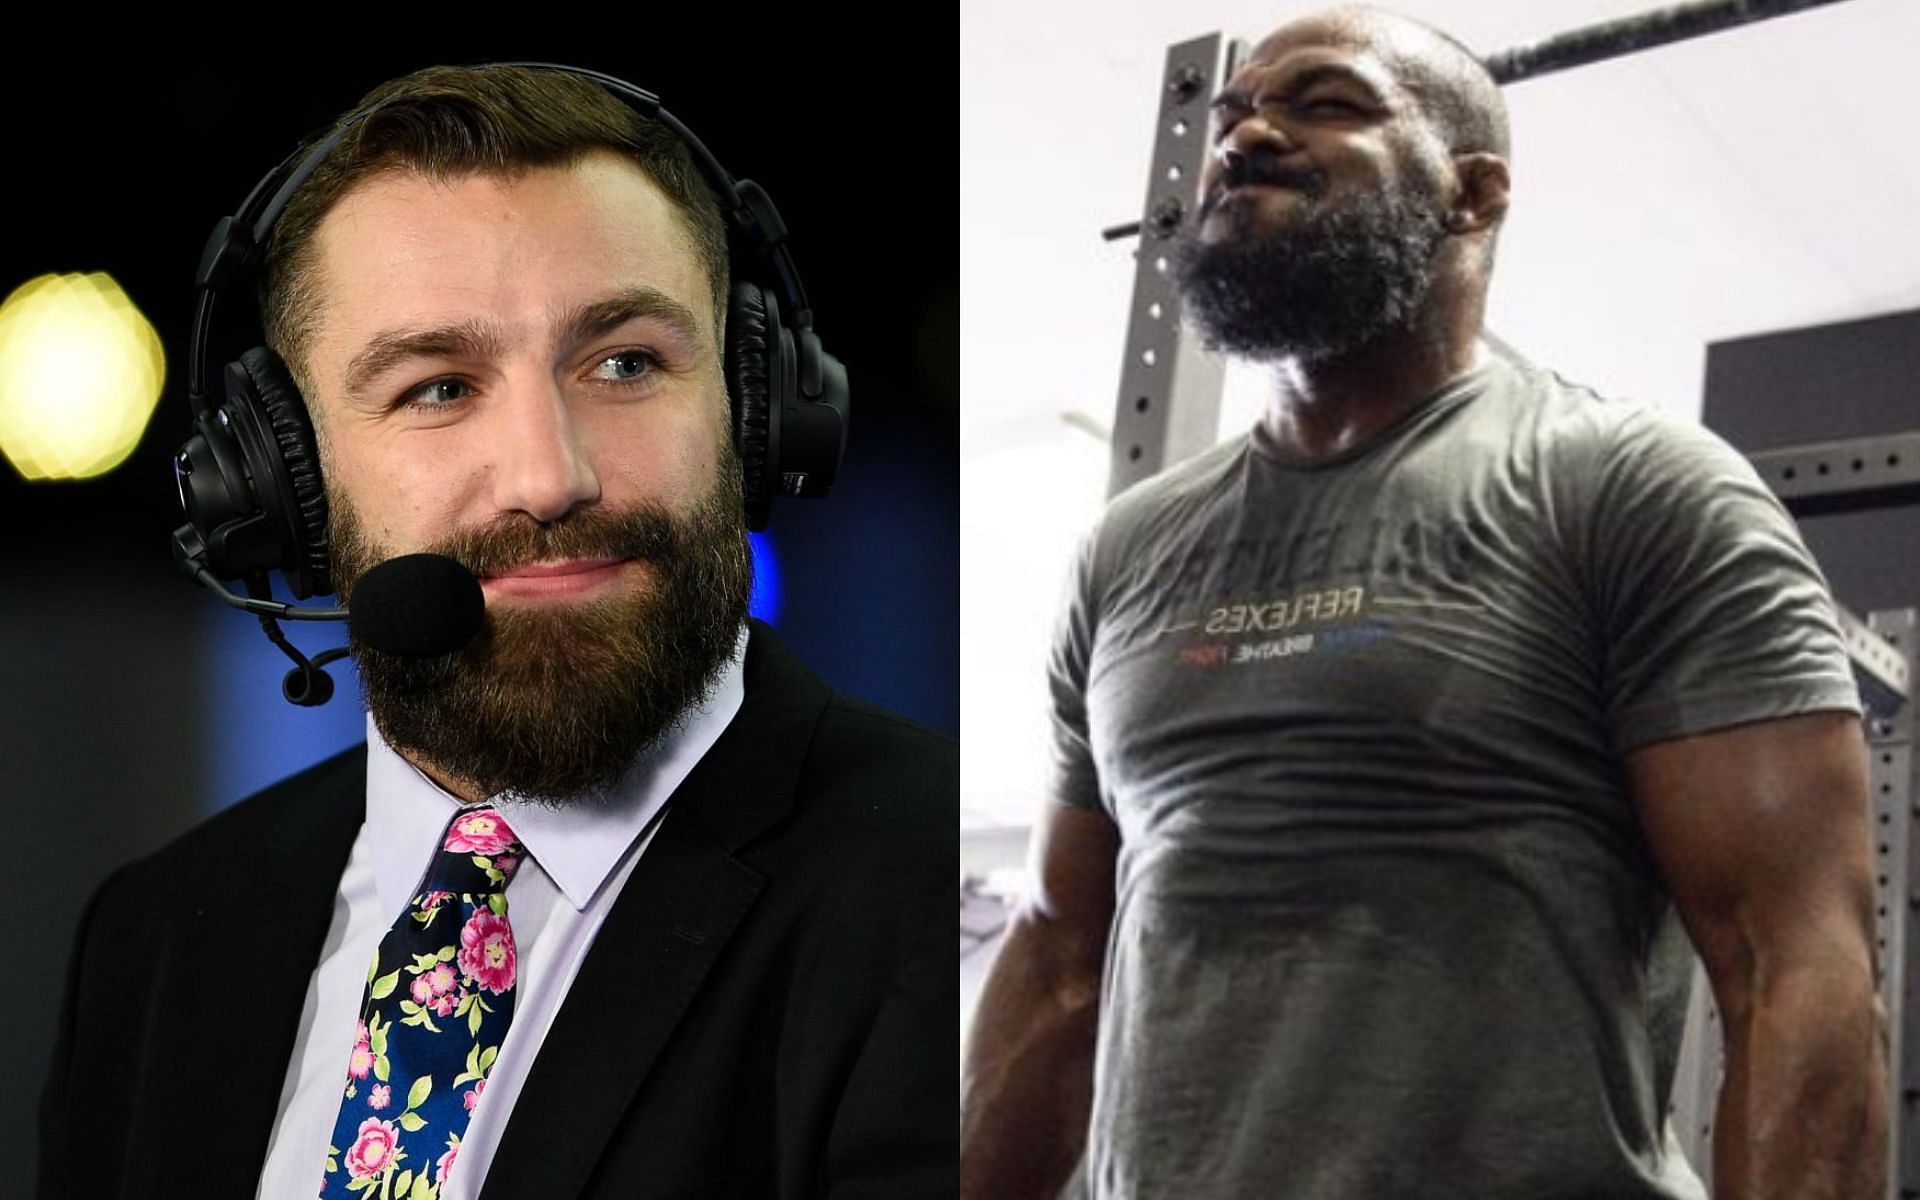 Jon Jones may not be able to go back to 205 pounds if his heavyweight venture fails says Michael Chiesa